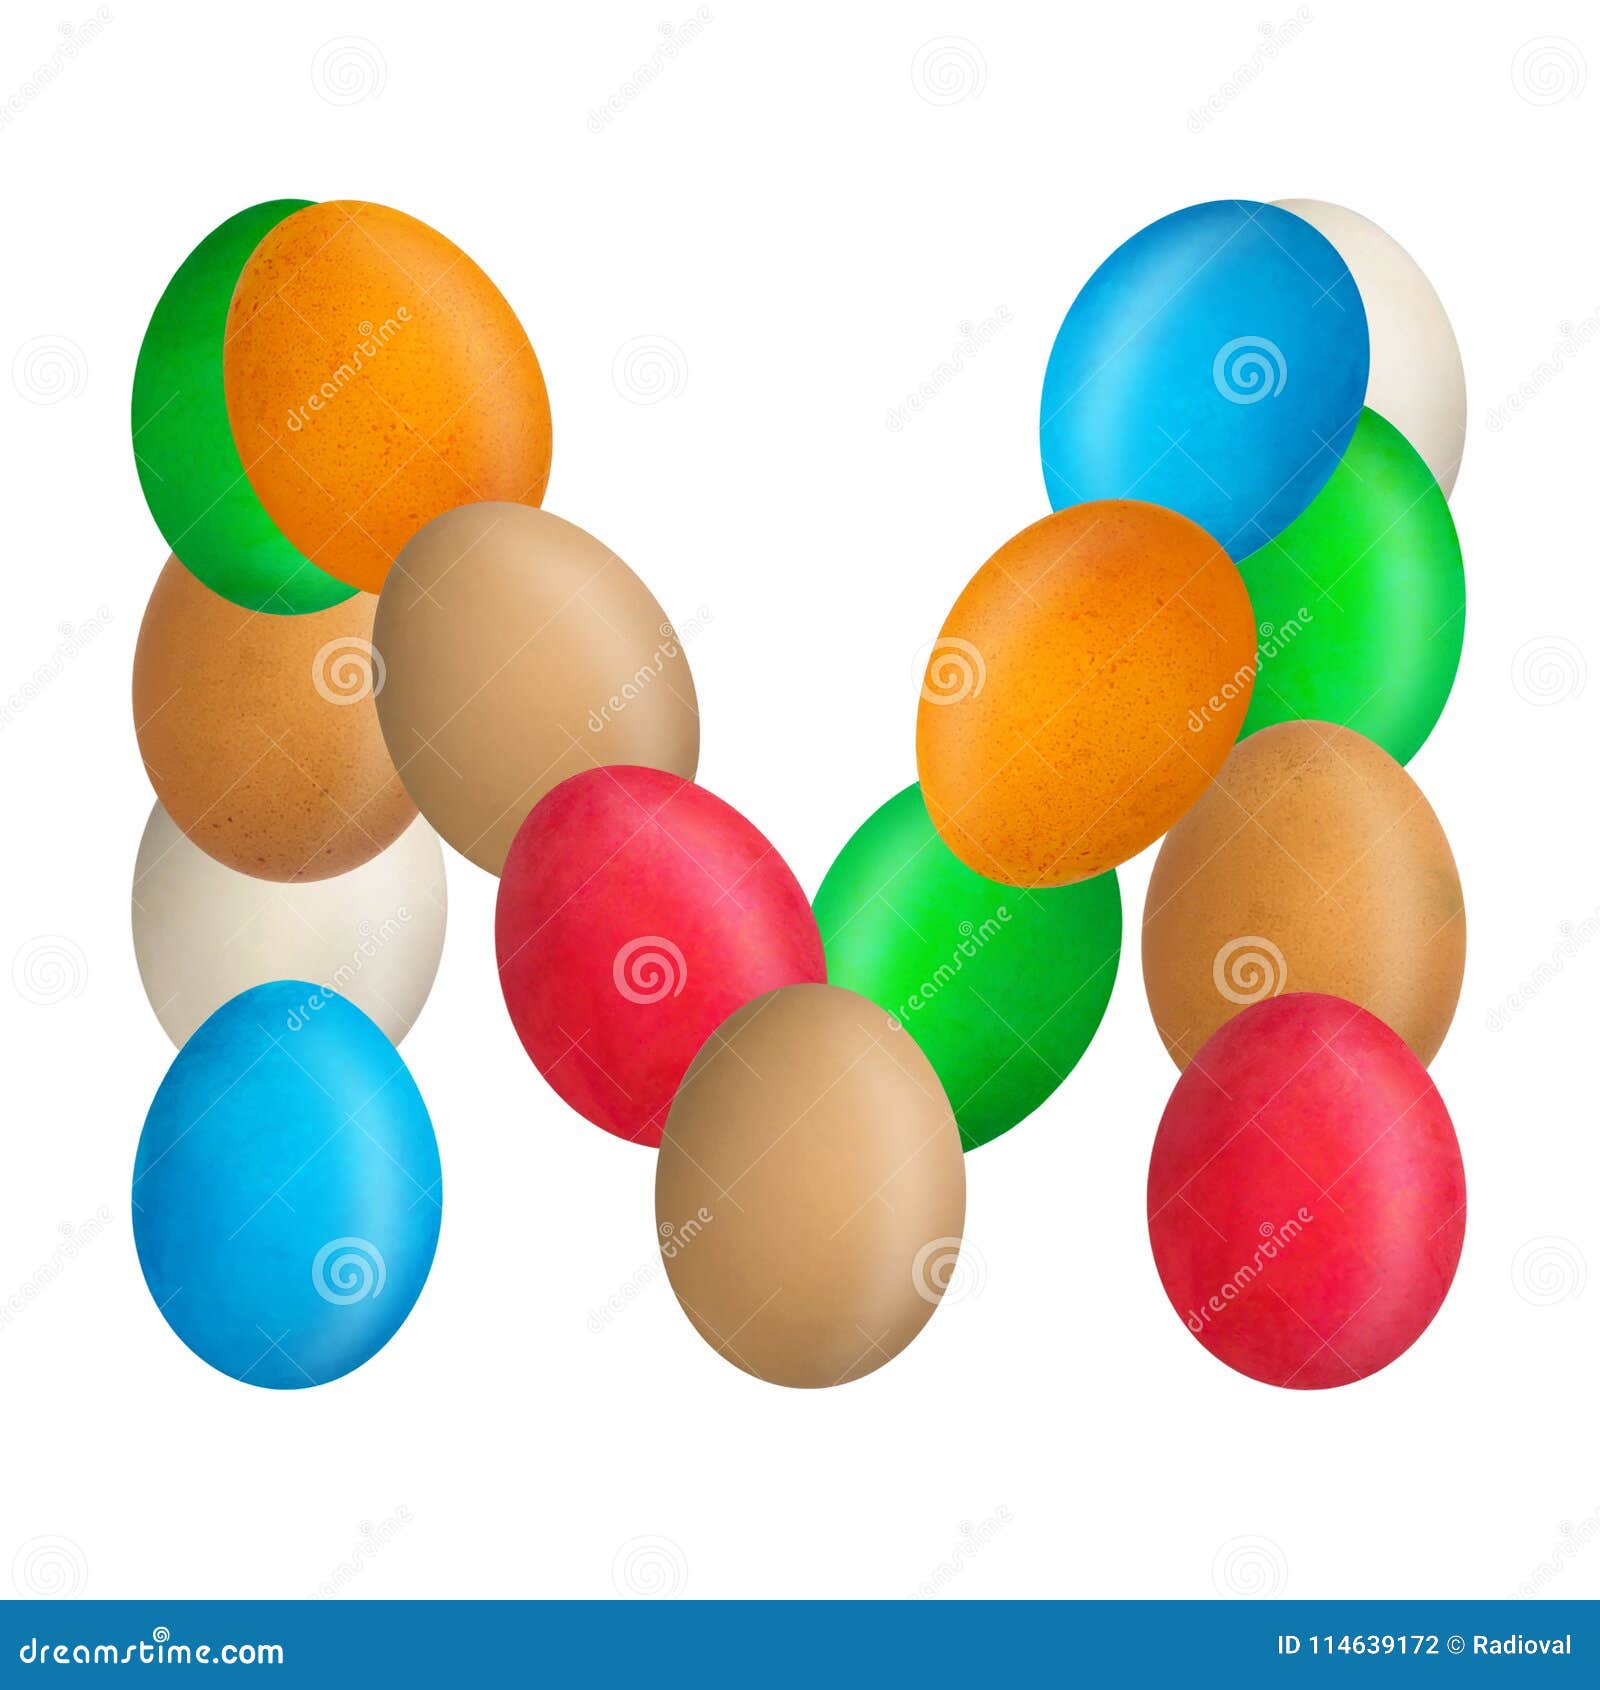 the-letter-m-of-the-english-alphabet-is-made-up-of-colorful-eggs-isolated-white-background